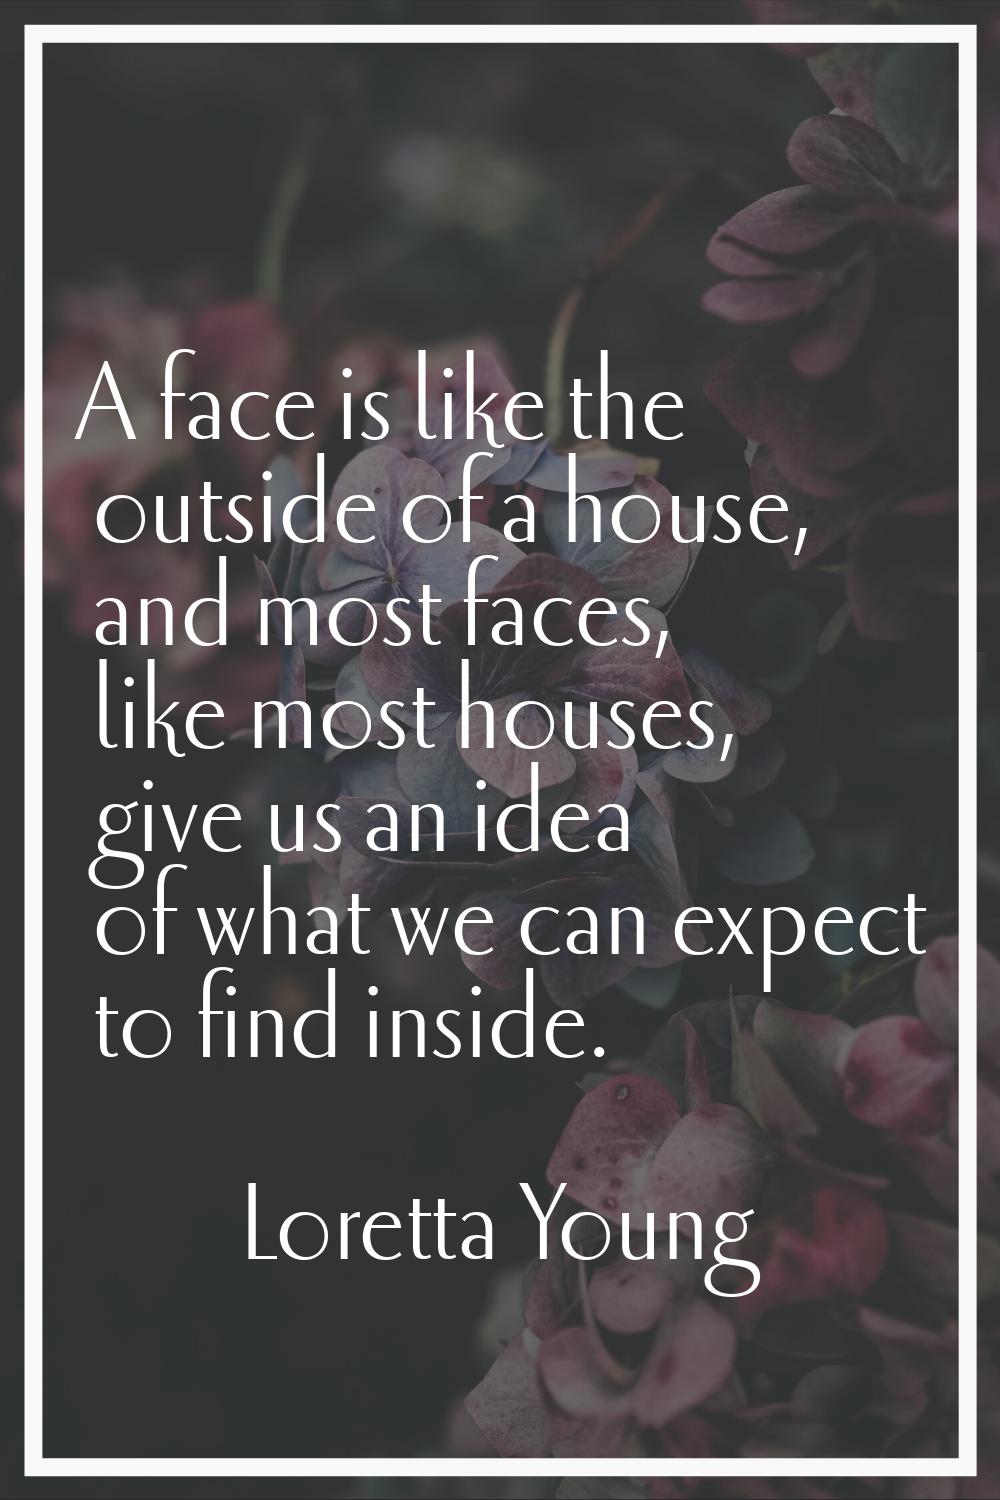 A face is like the outside of a house, and most faces, like most houses, give us an idea of what we